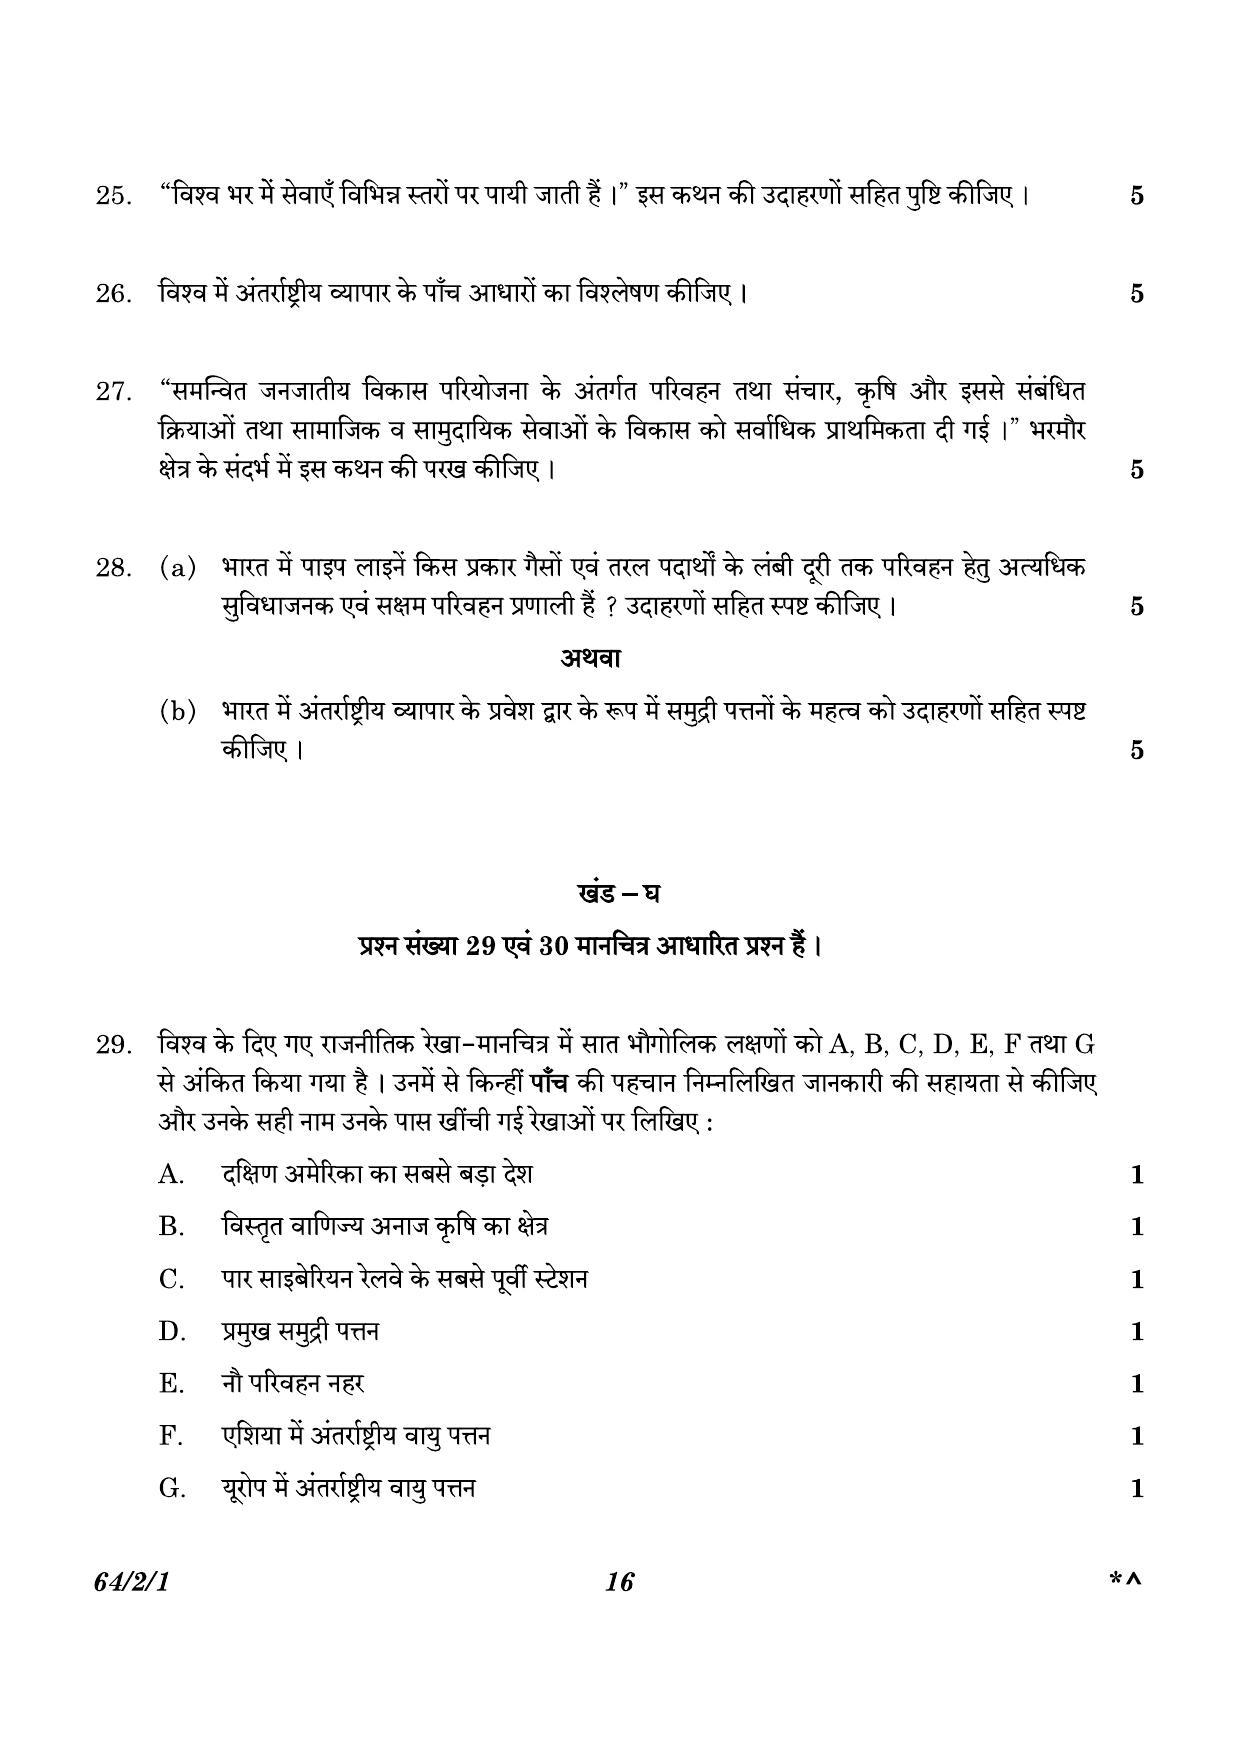 CBSE Class 12 64-2-1 Geography 2023 Question Paper - Page 16